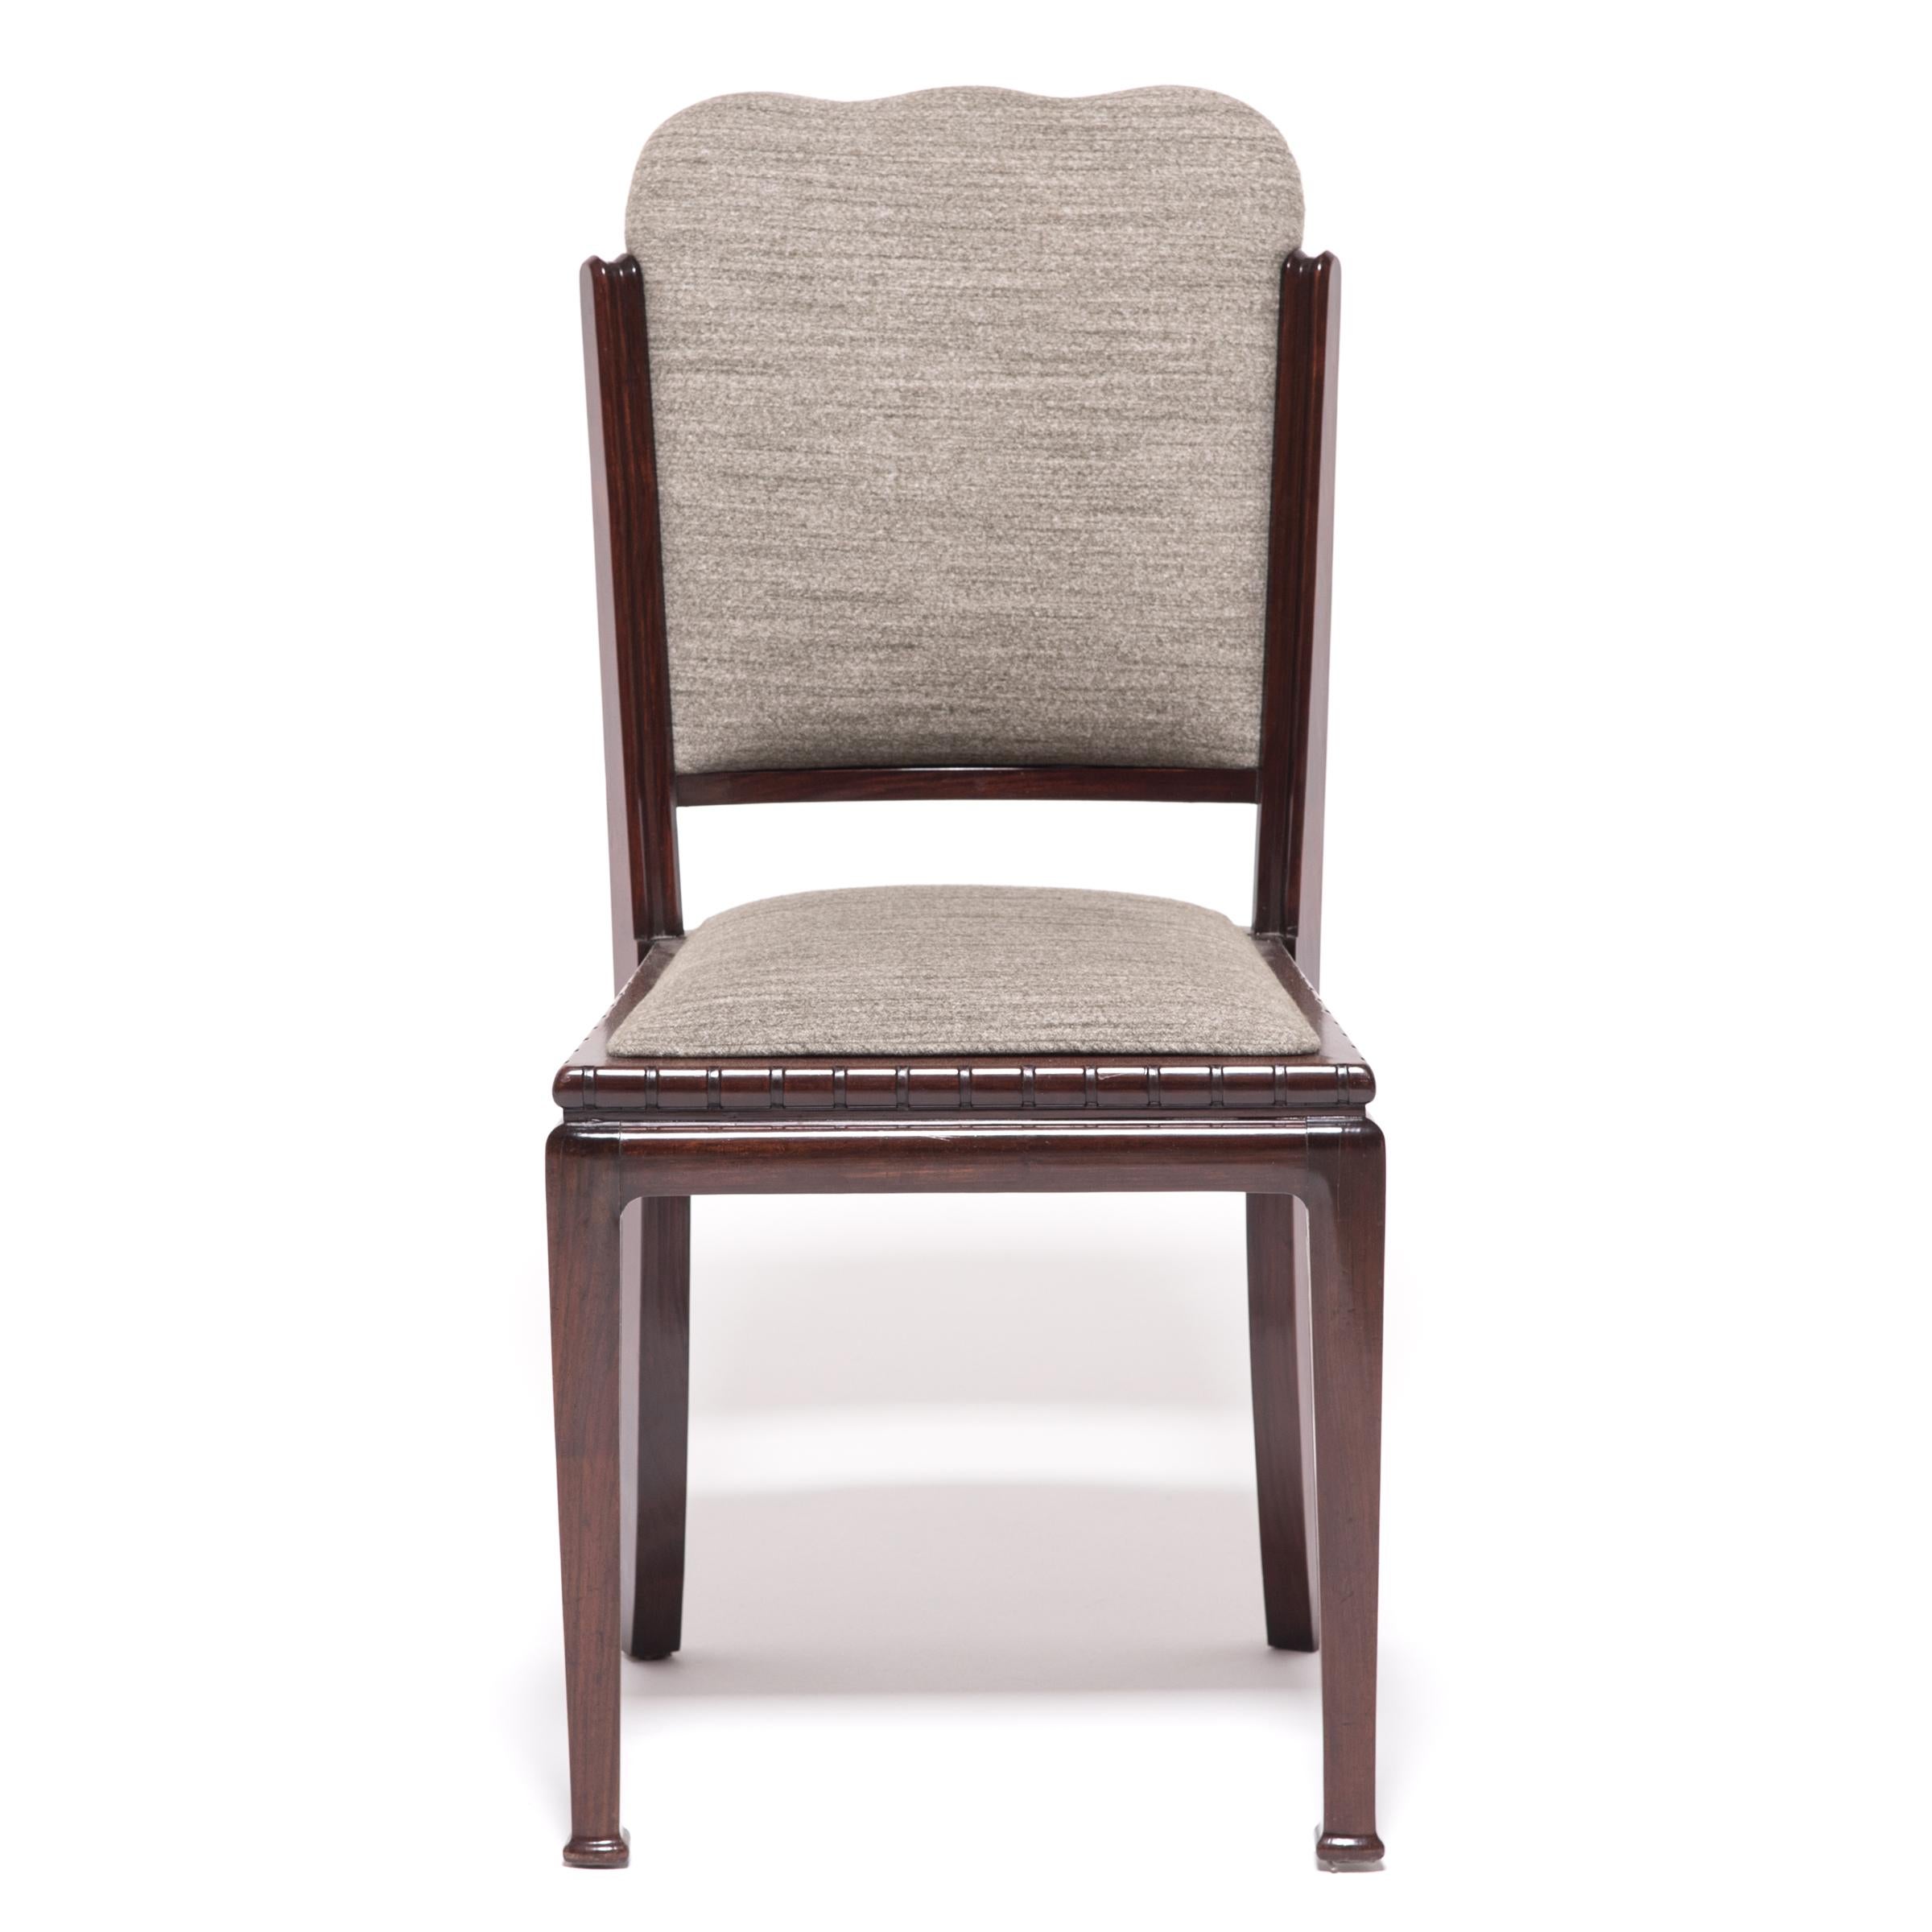 Made in the 1920s to satisfy the worldwide hunger for all things Art Deco, this unique chair combines the streamlined style of the era with a classic Chinese aesthetic. The beautiful hardwood frame hints at tradition with bamboo-like modeling and